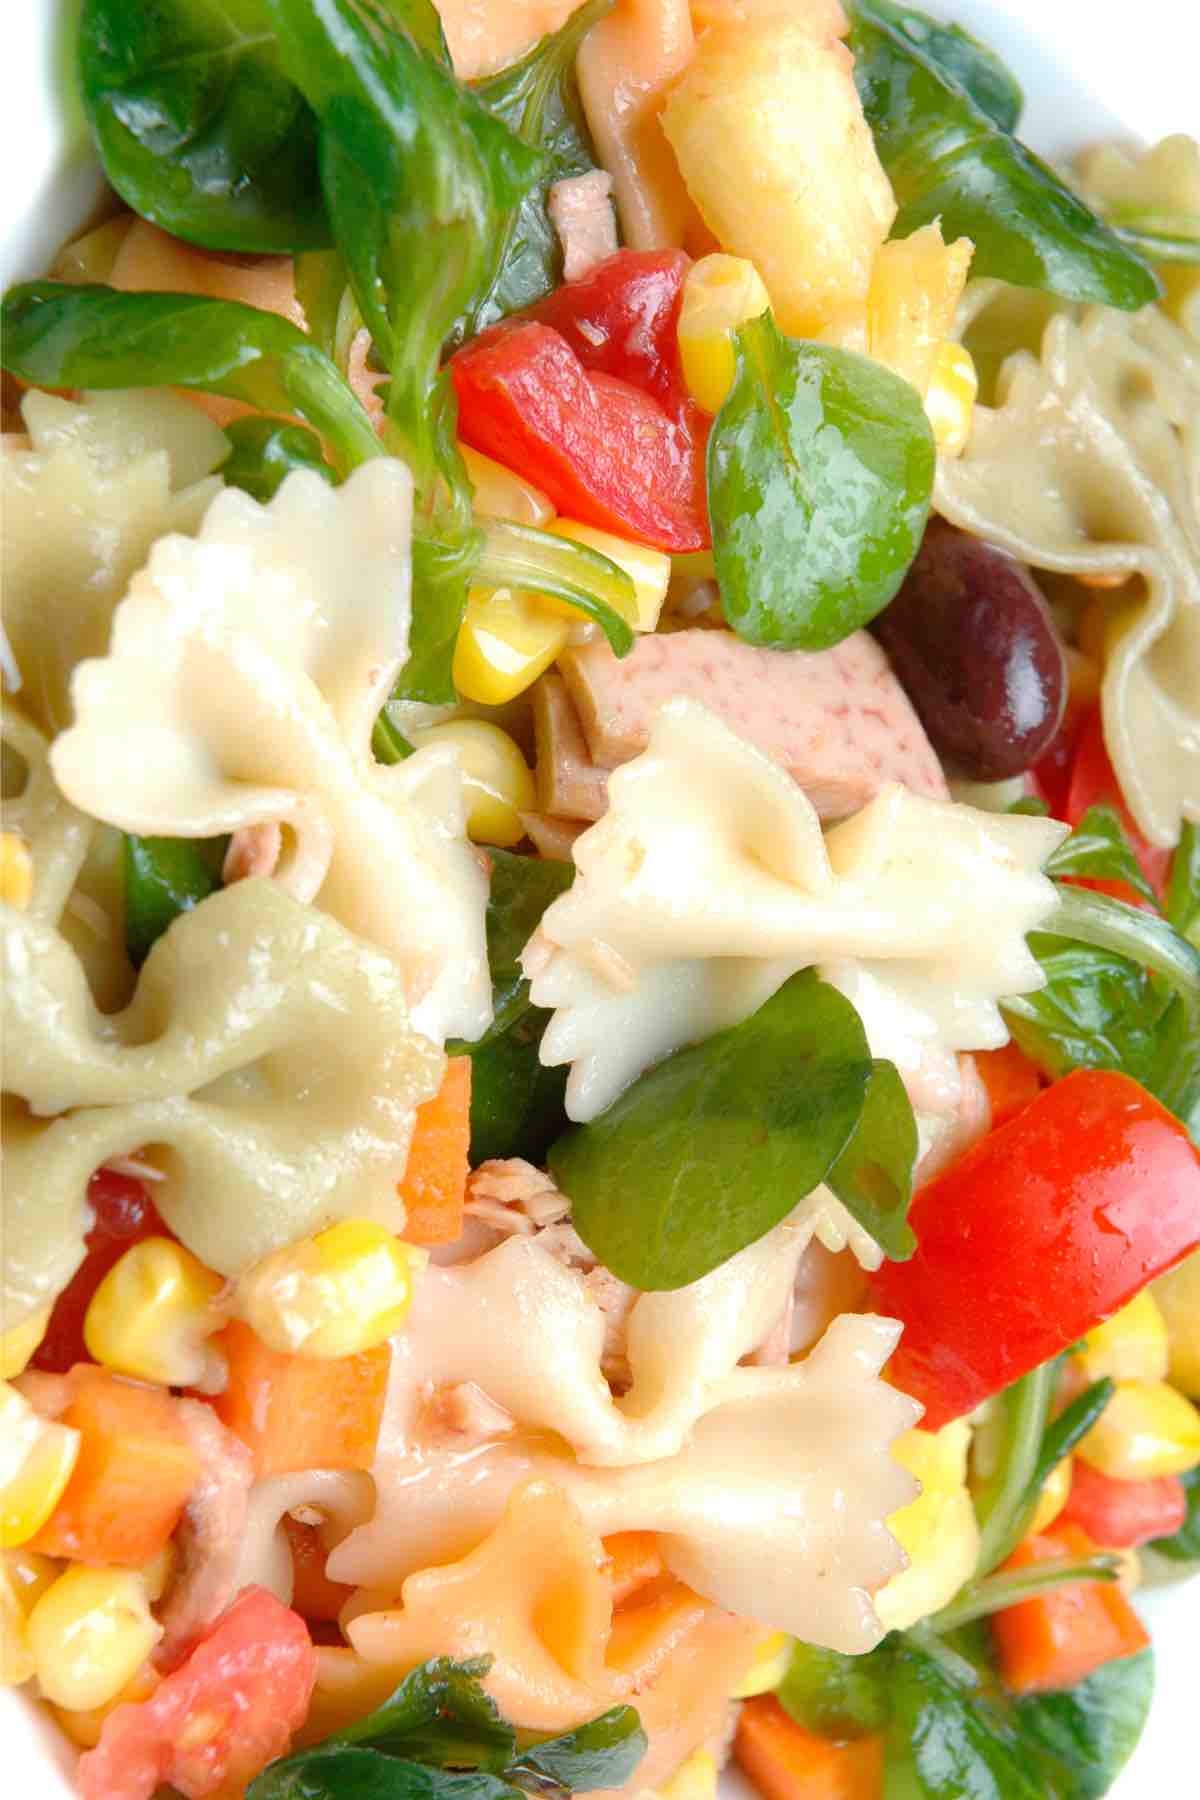 20+ Popular Pasta Side Dishes that Are Easy to Make